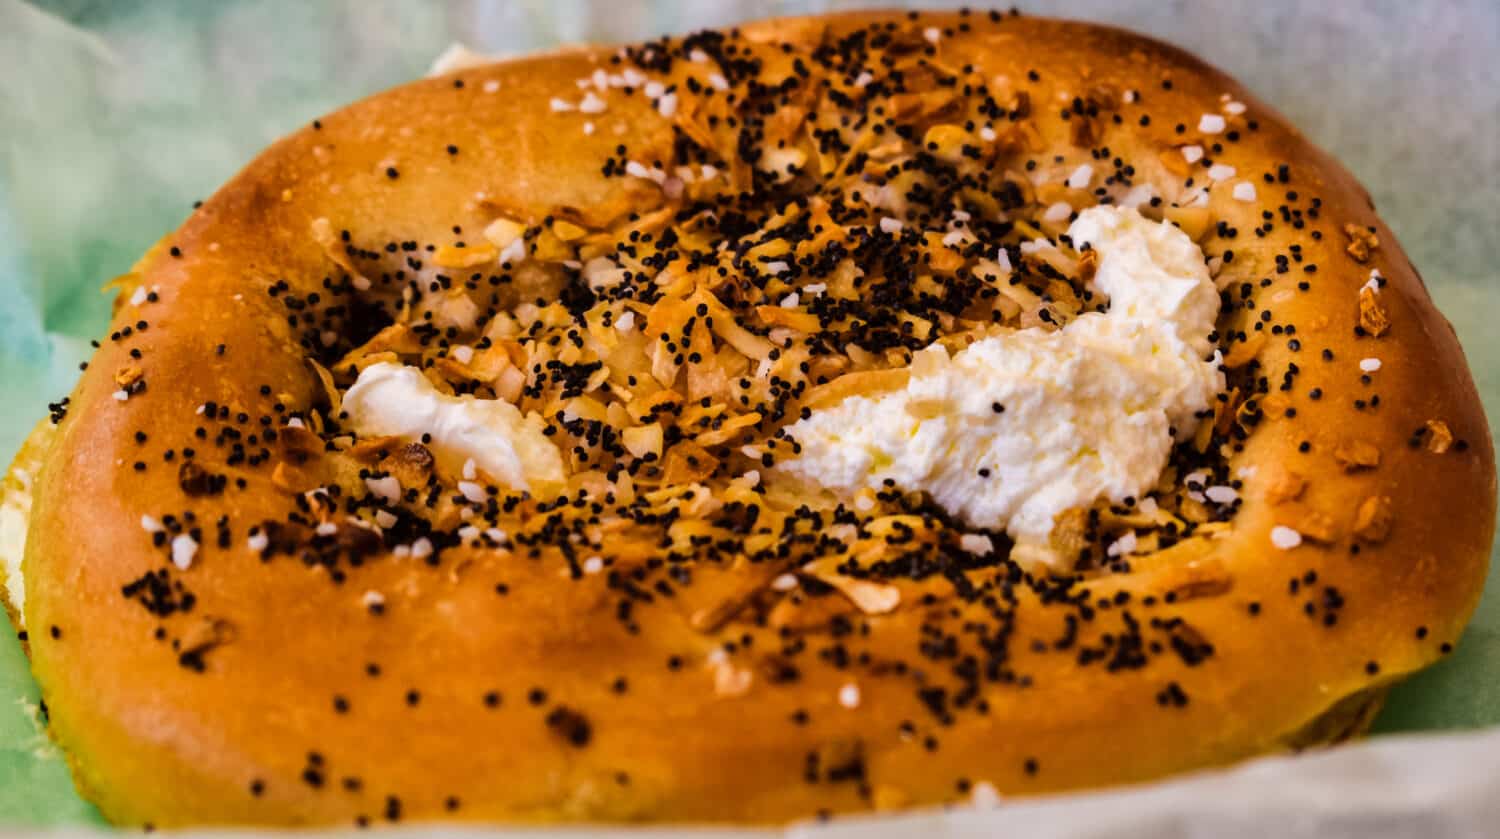 Food - Bialy roll, with cream cheese